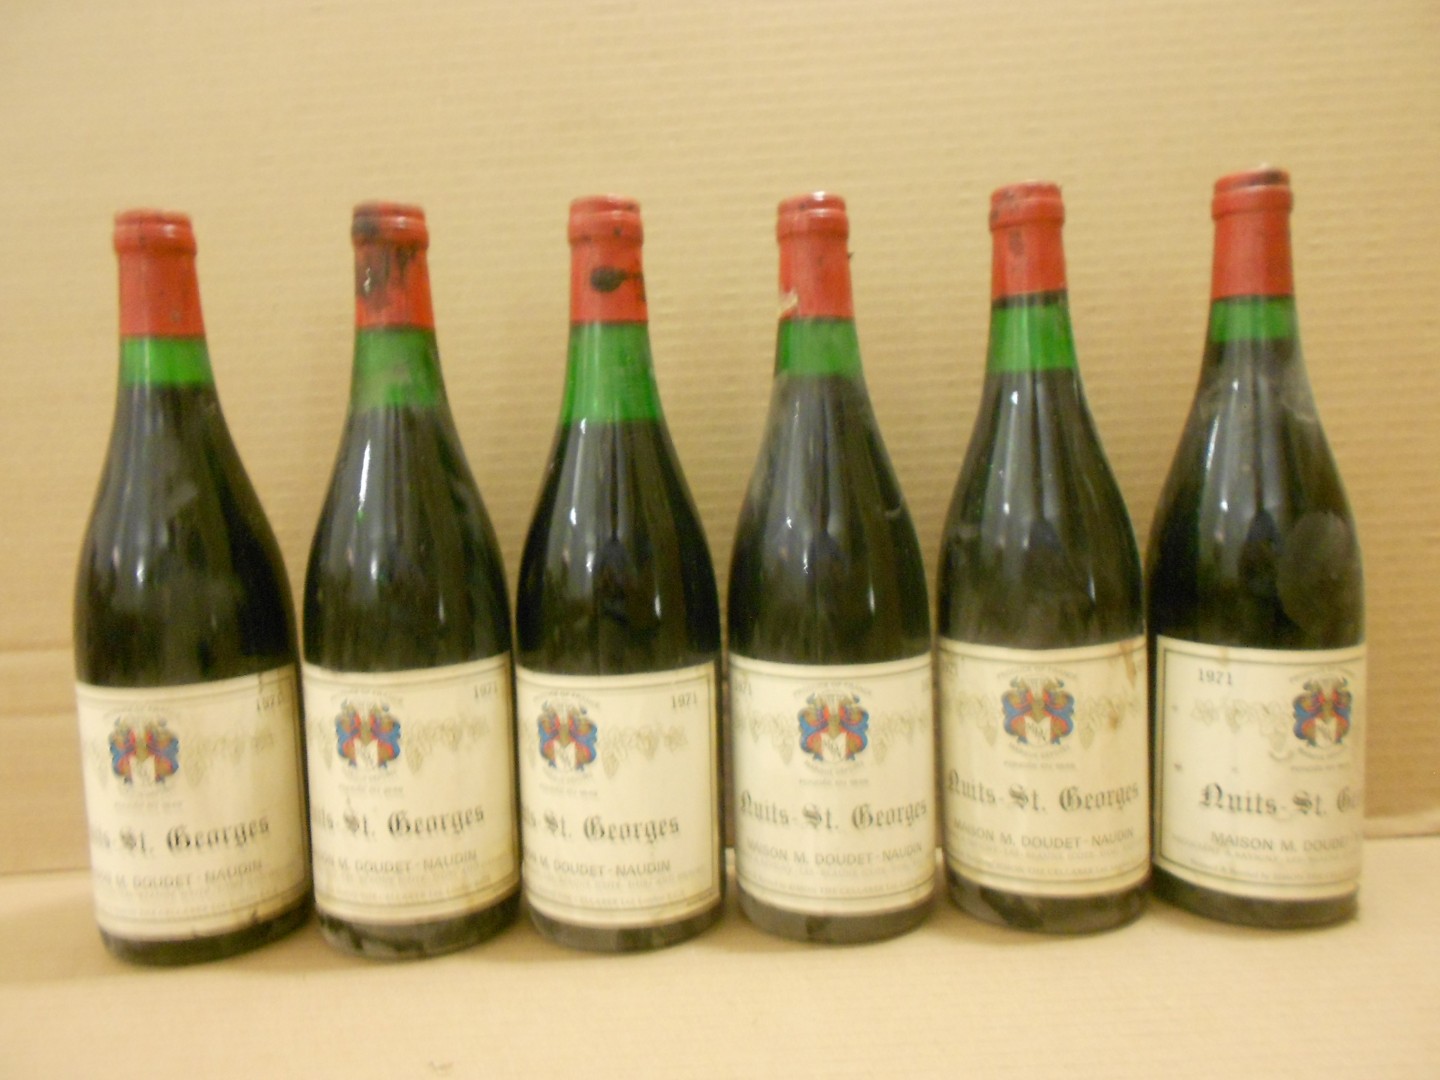 Nuits St Georges 1971, Maison M. Doudet-Naudin, twelve bottles (levels vary; removed from a